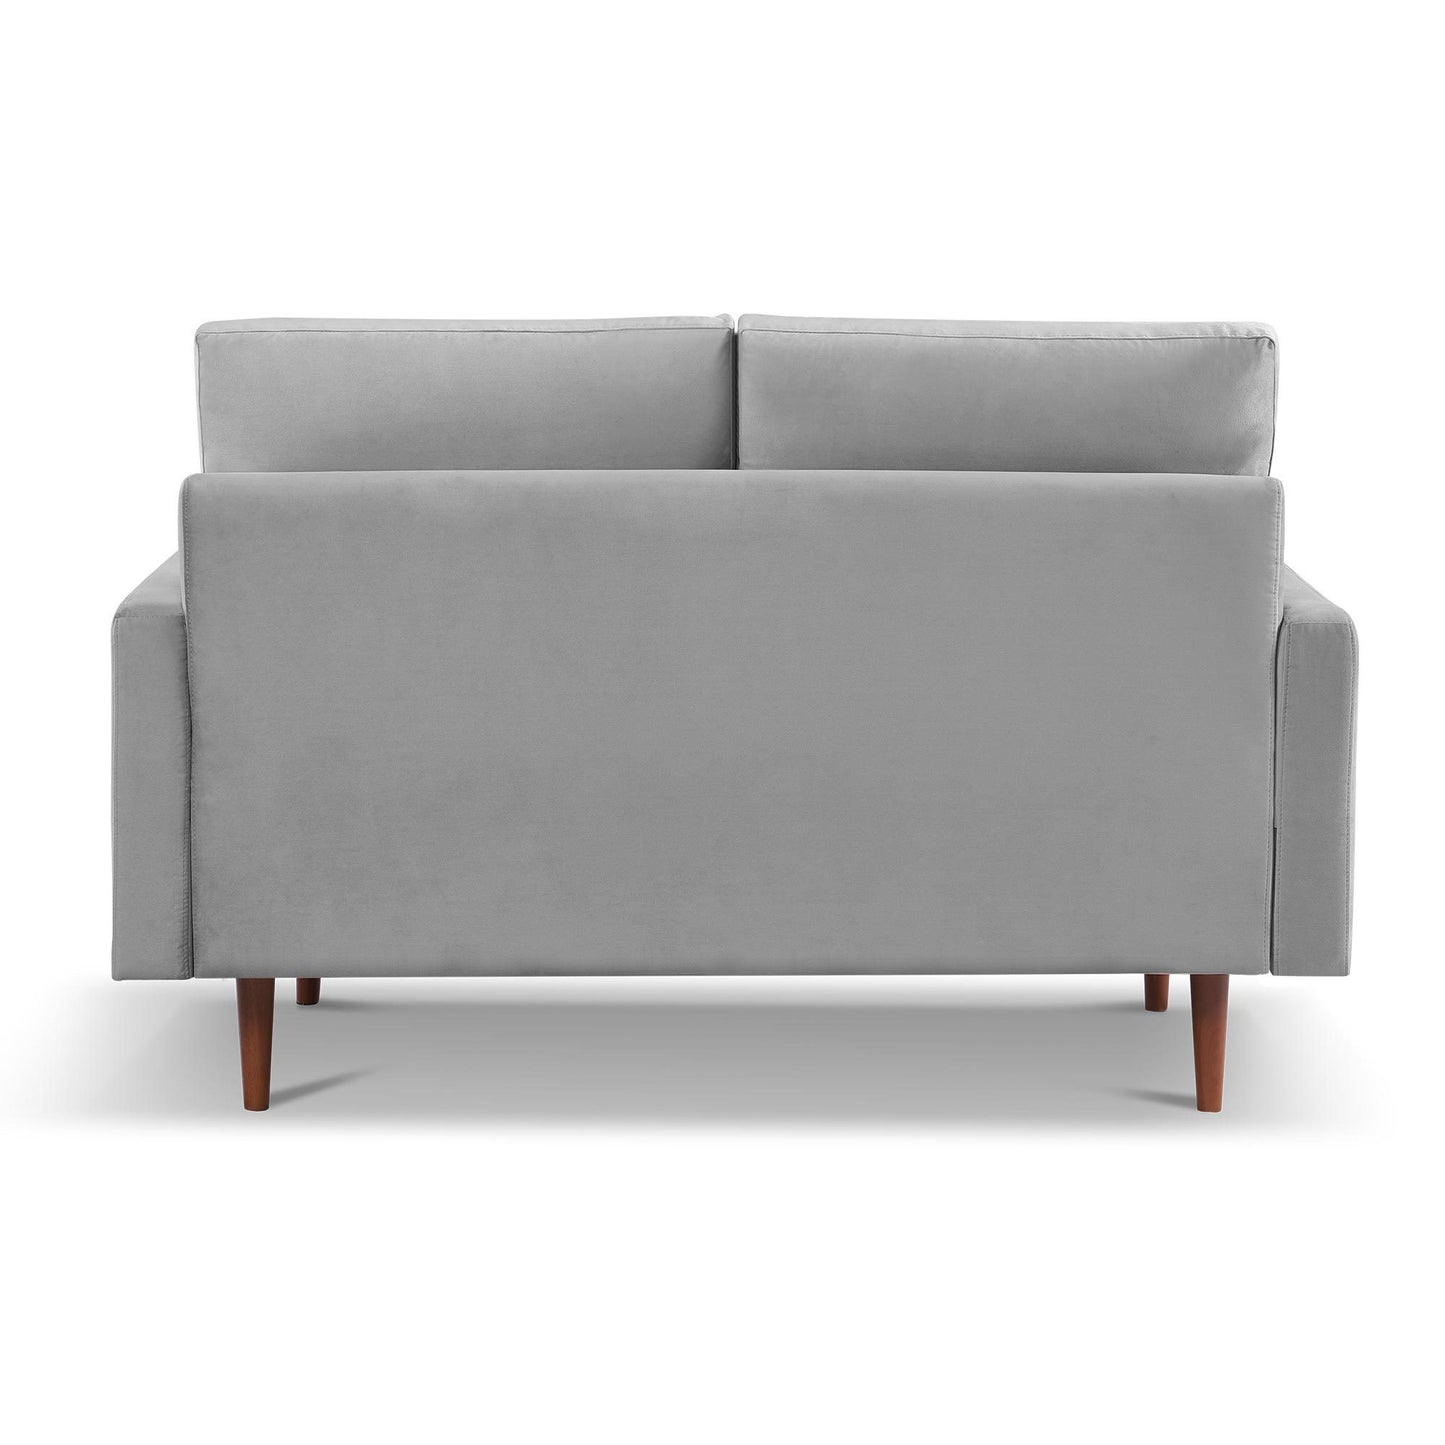 57.1" Modern Decor Upholstered Sofa Furniture, Wide Velvet Fabric Loveseat Couch, Solid Wooden Frame with Padded Cushion - Grey